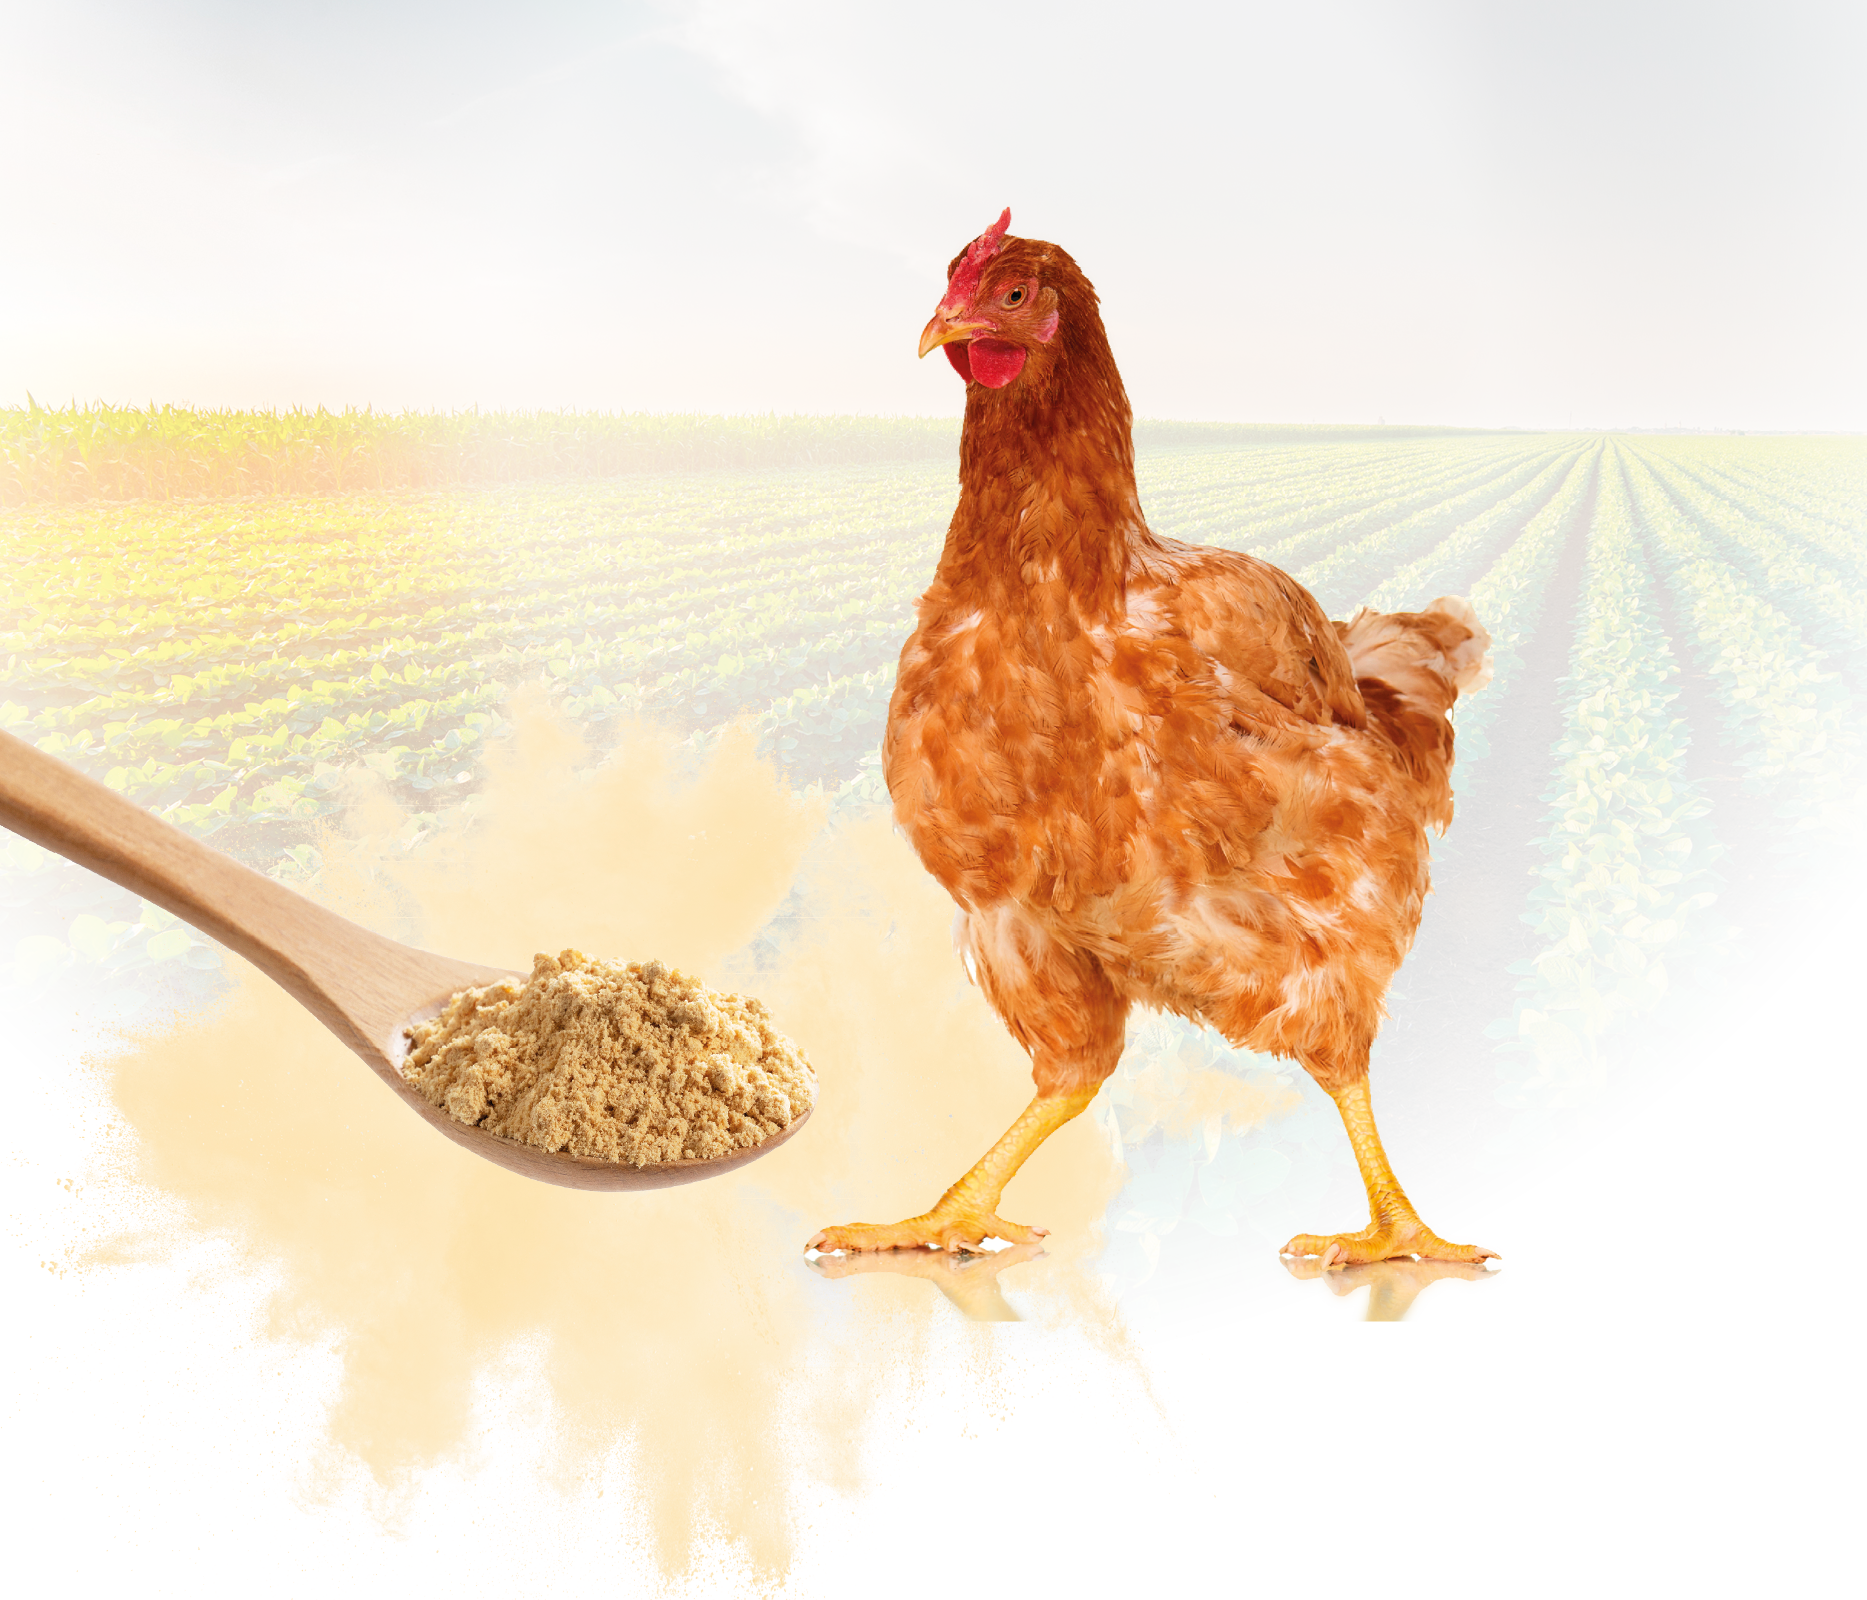 Nutritional Value of Soybeans in Poultry Feed